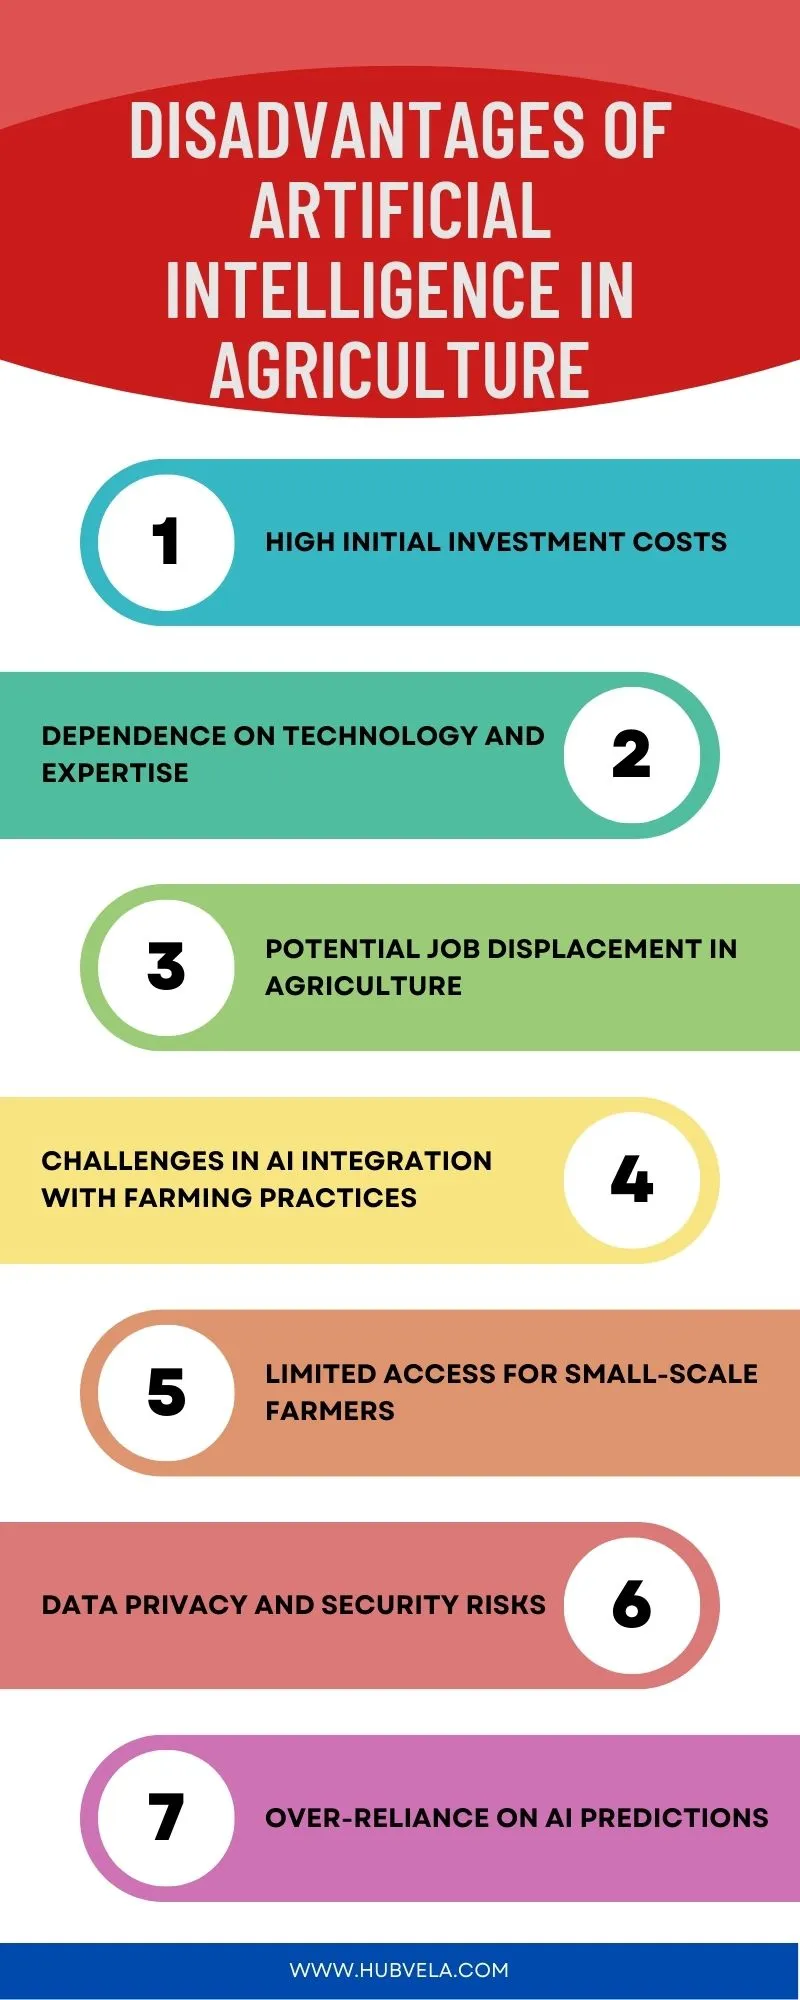 Disadvantages of Artificial Intelligence in Agriculture Infographic